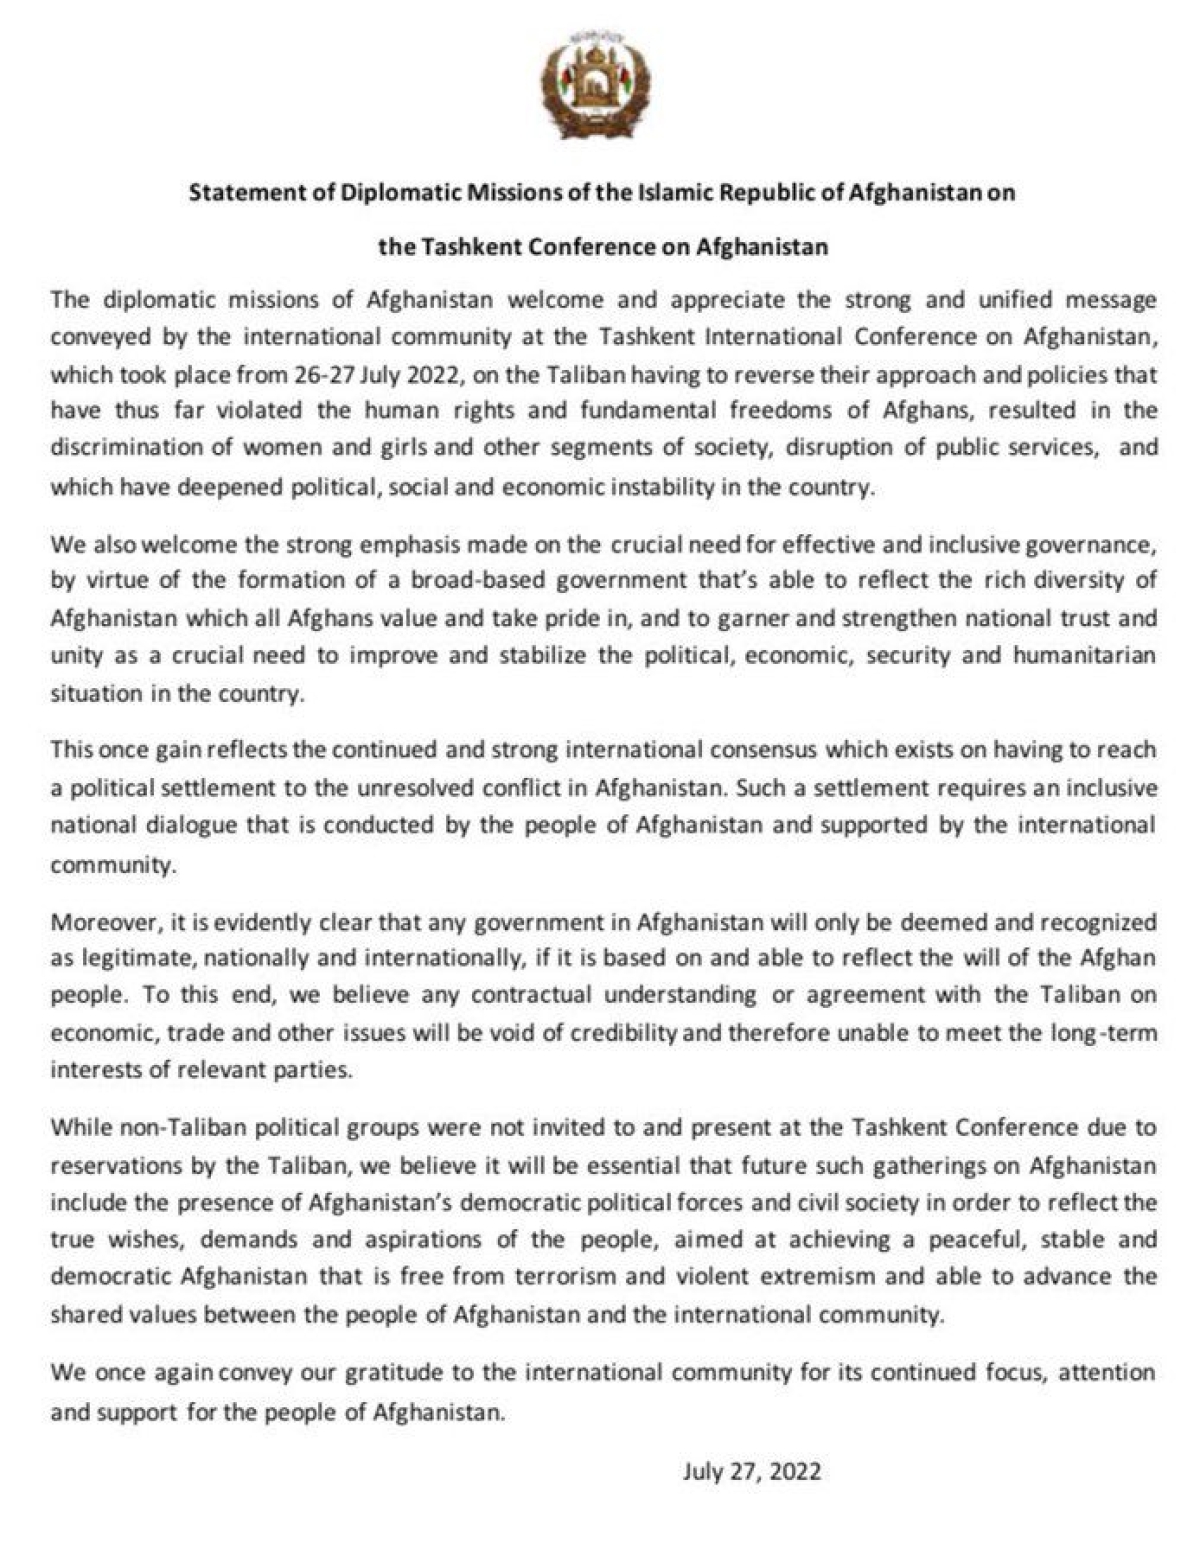 STATEMENT OF THE DIPLOMATIC MISSIONS OF THE ISLAMIC REPUBLIC OF AFGHANISTAN ON THE RECENT TASHKENT CONFERENCE ON AFGHANISTAN Afghanistan.